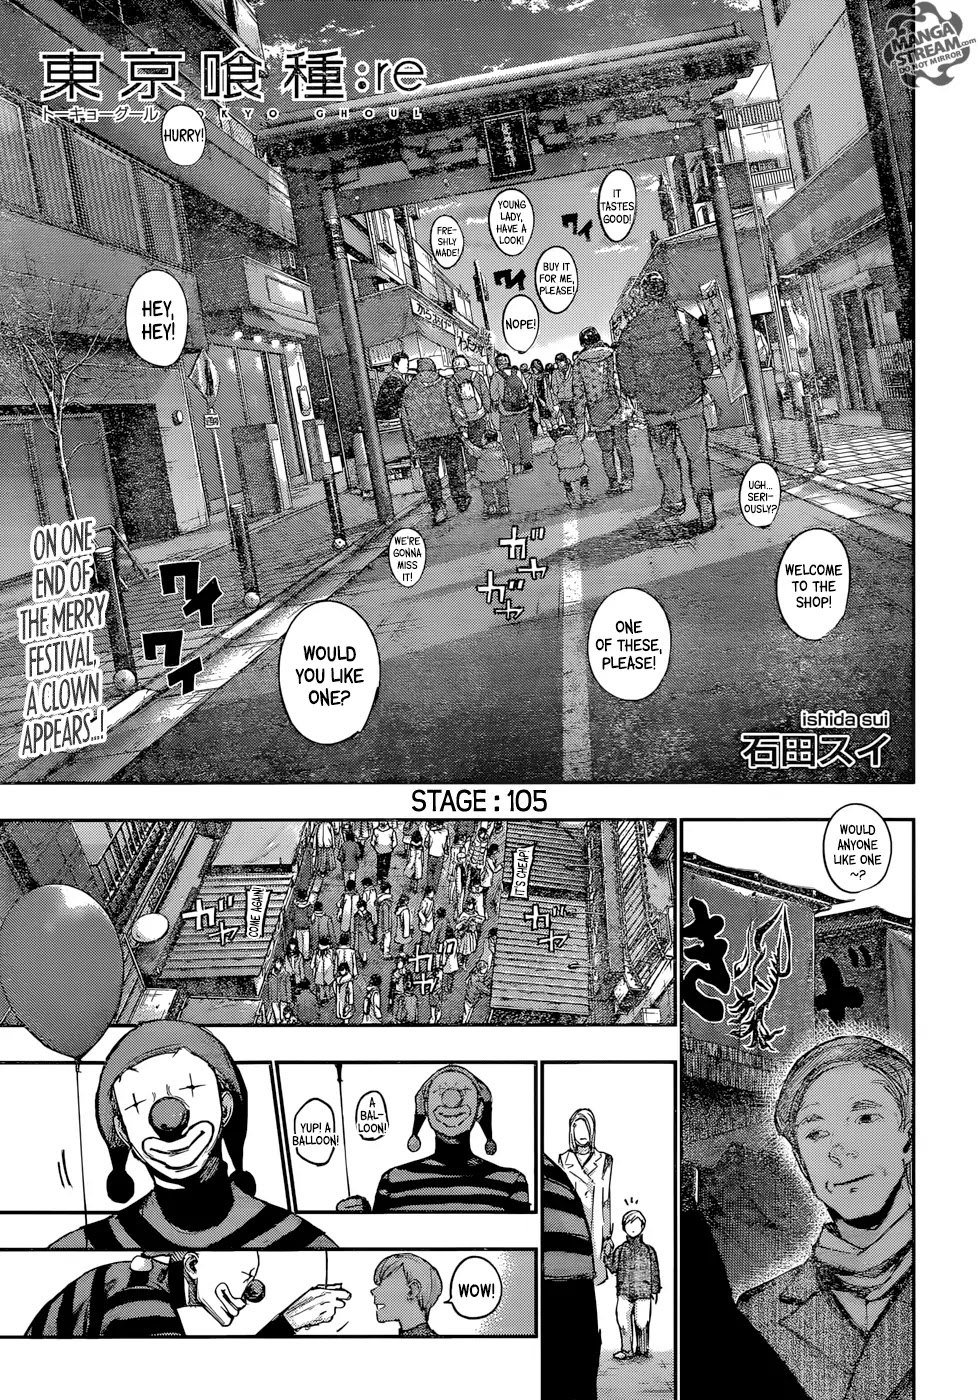 Tokyo Ghoul Re Vol 10 Chapter 105 Stage Tokyo Ghoul Manga Online